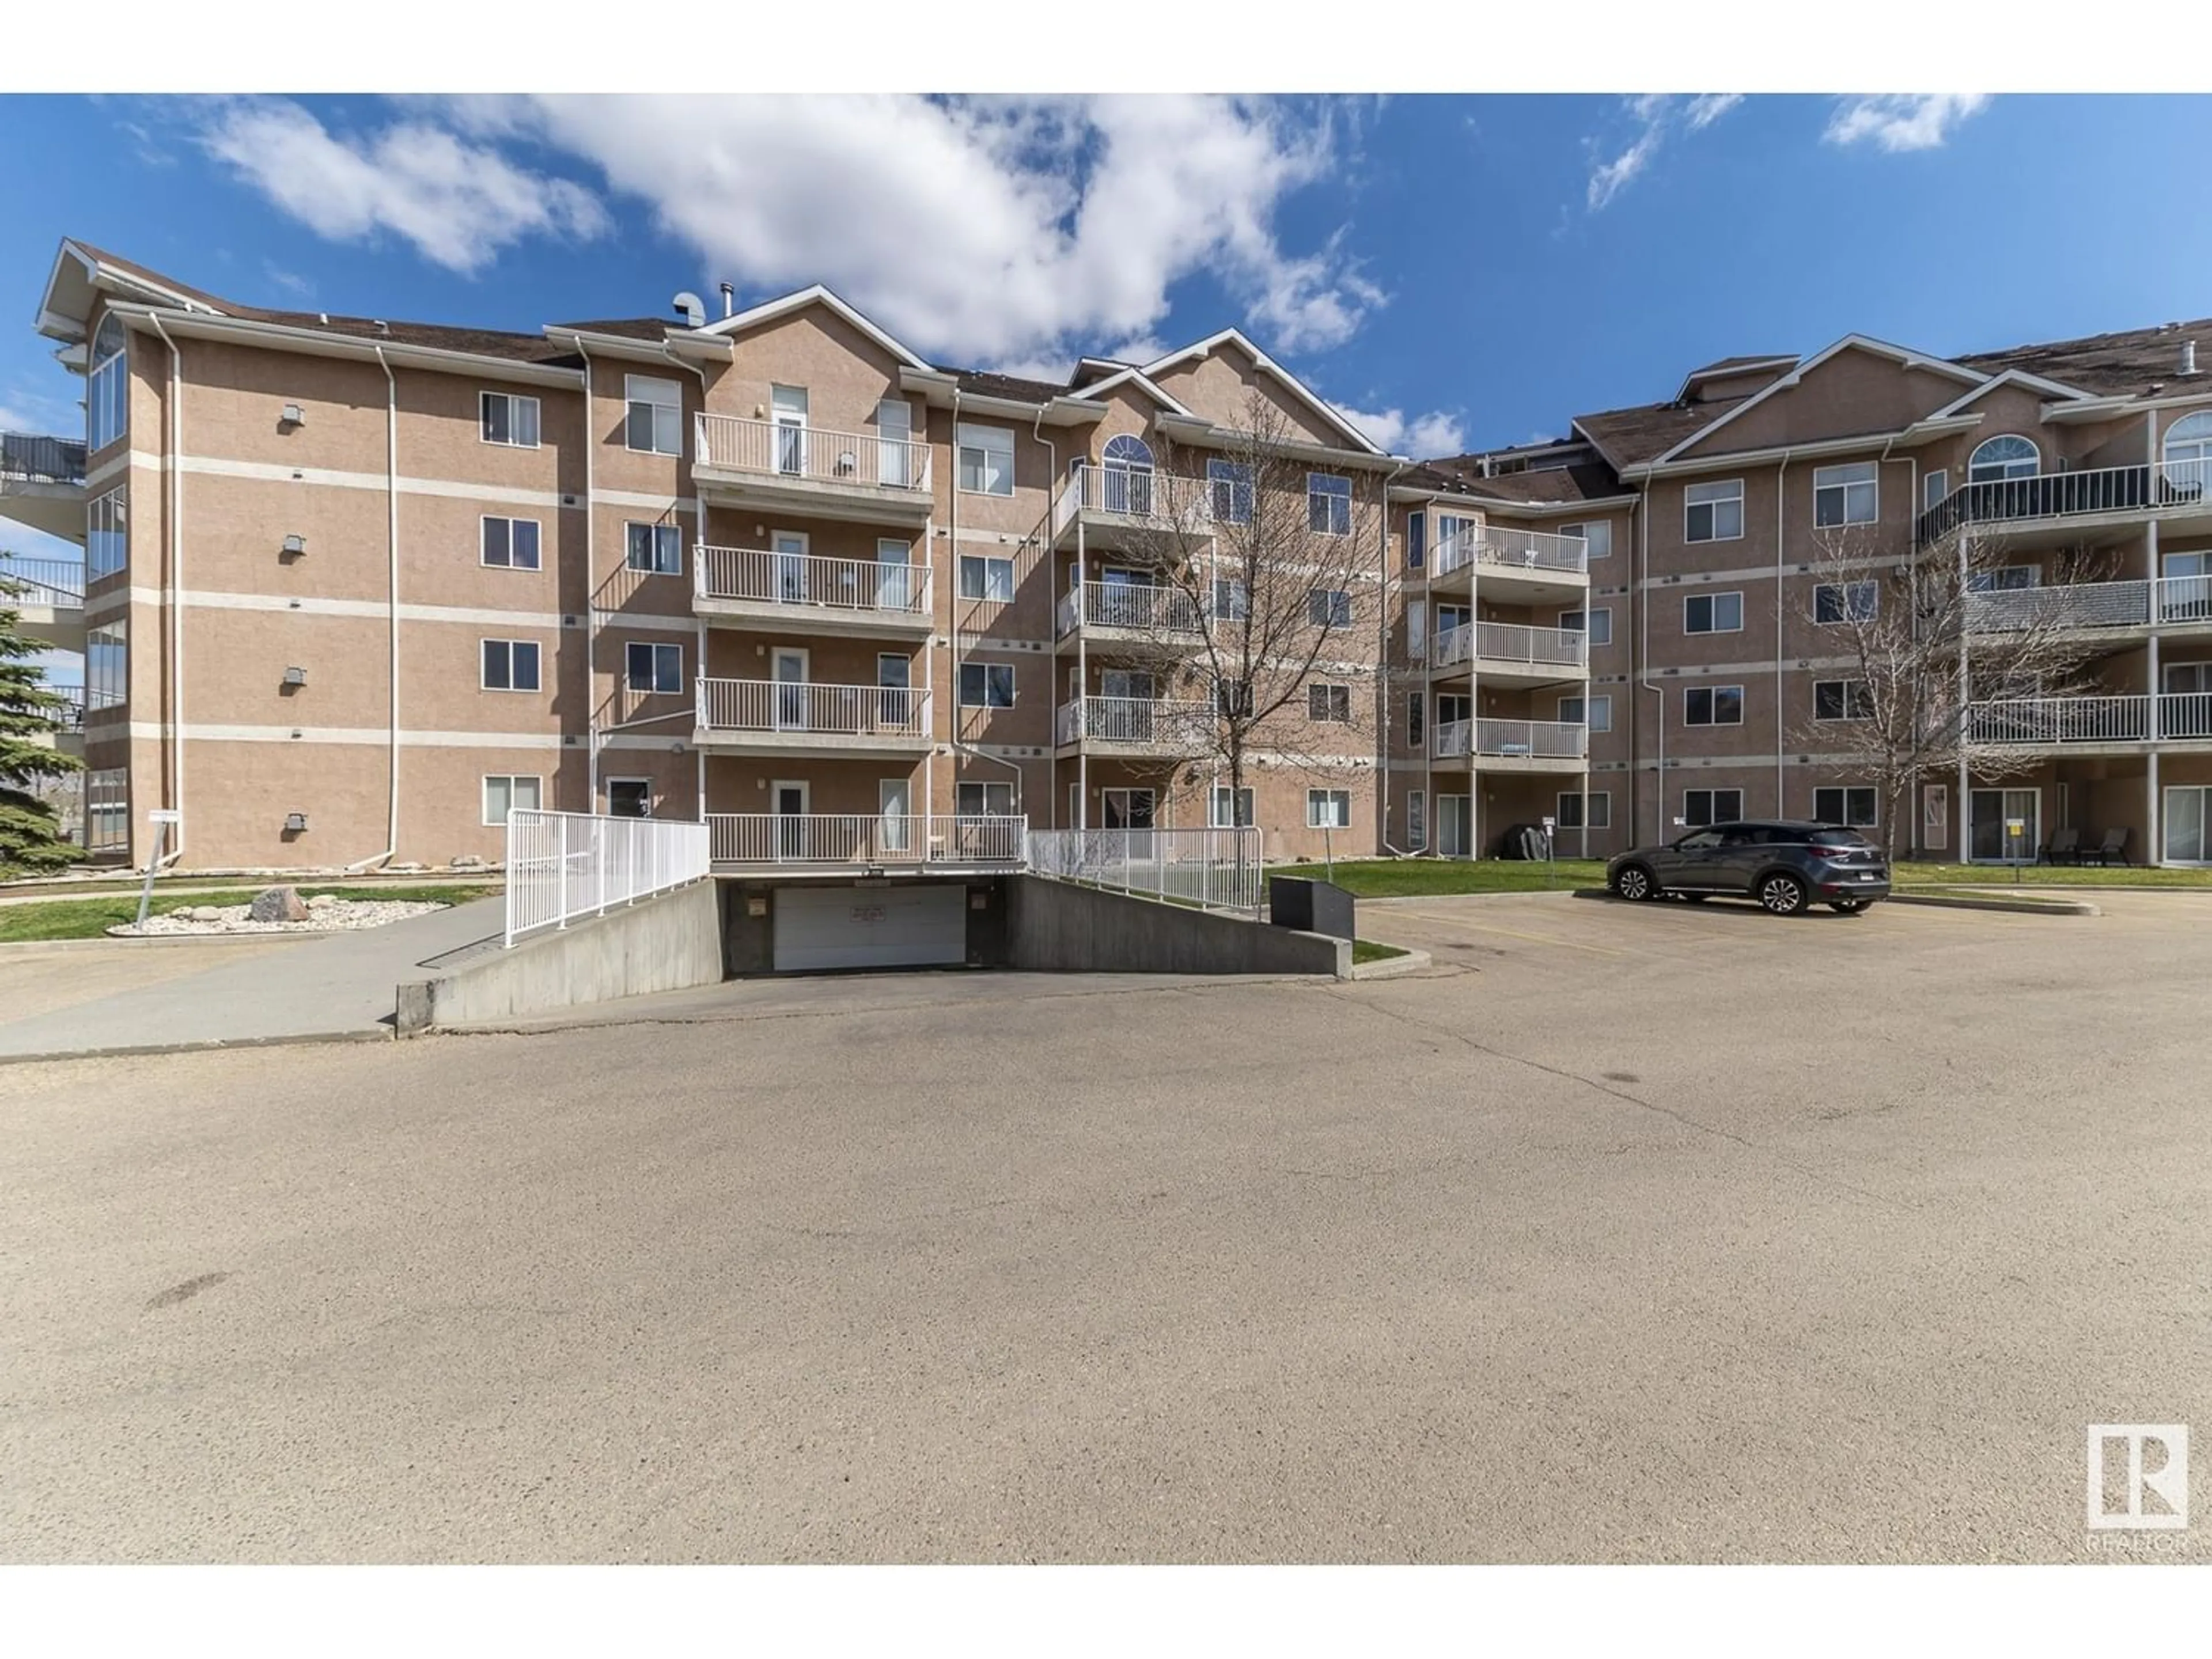 A pic from exterior of the house or condo for #316 4312 139 AV NW, Edmonton Alberta T5Y3J4